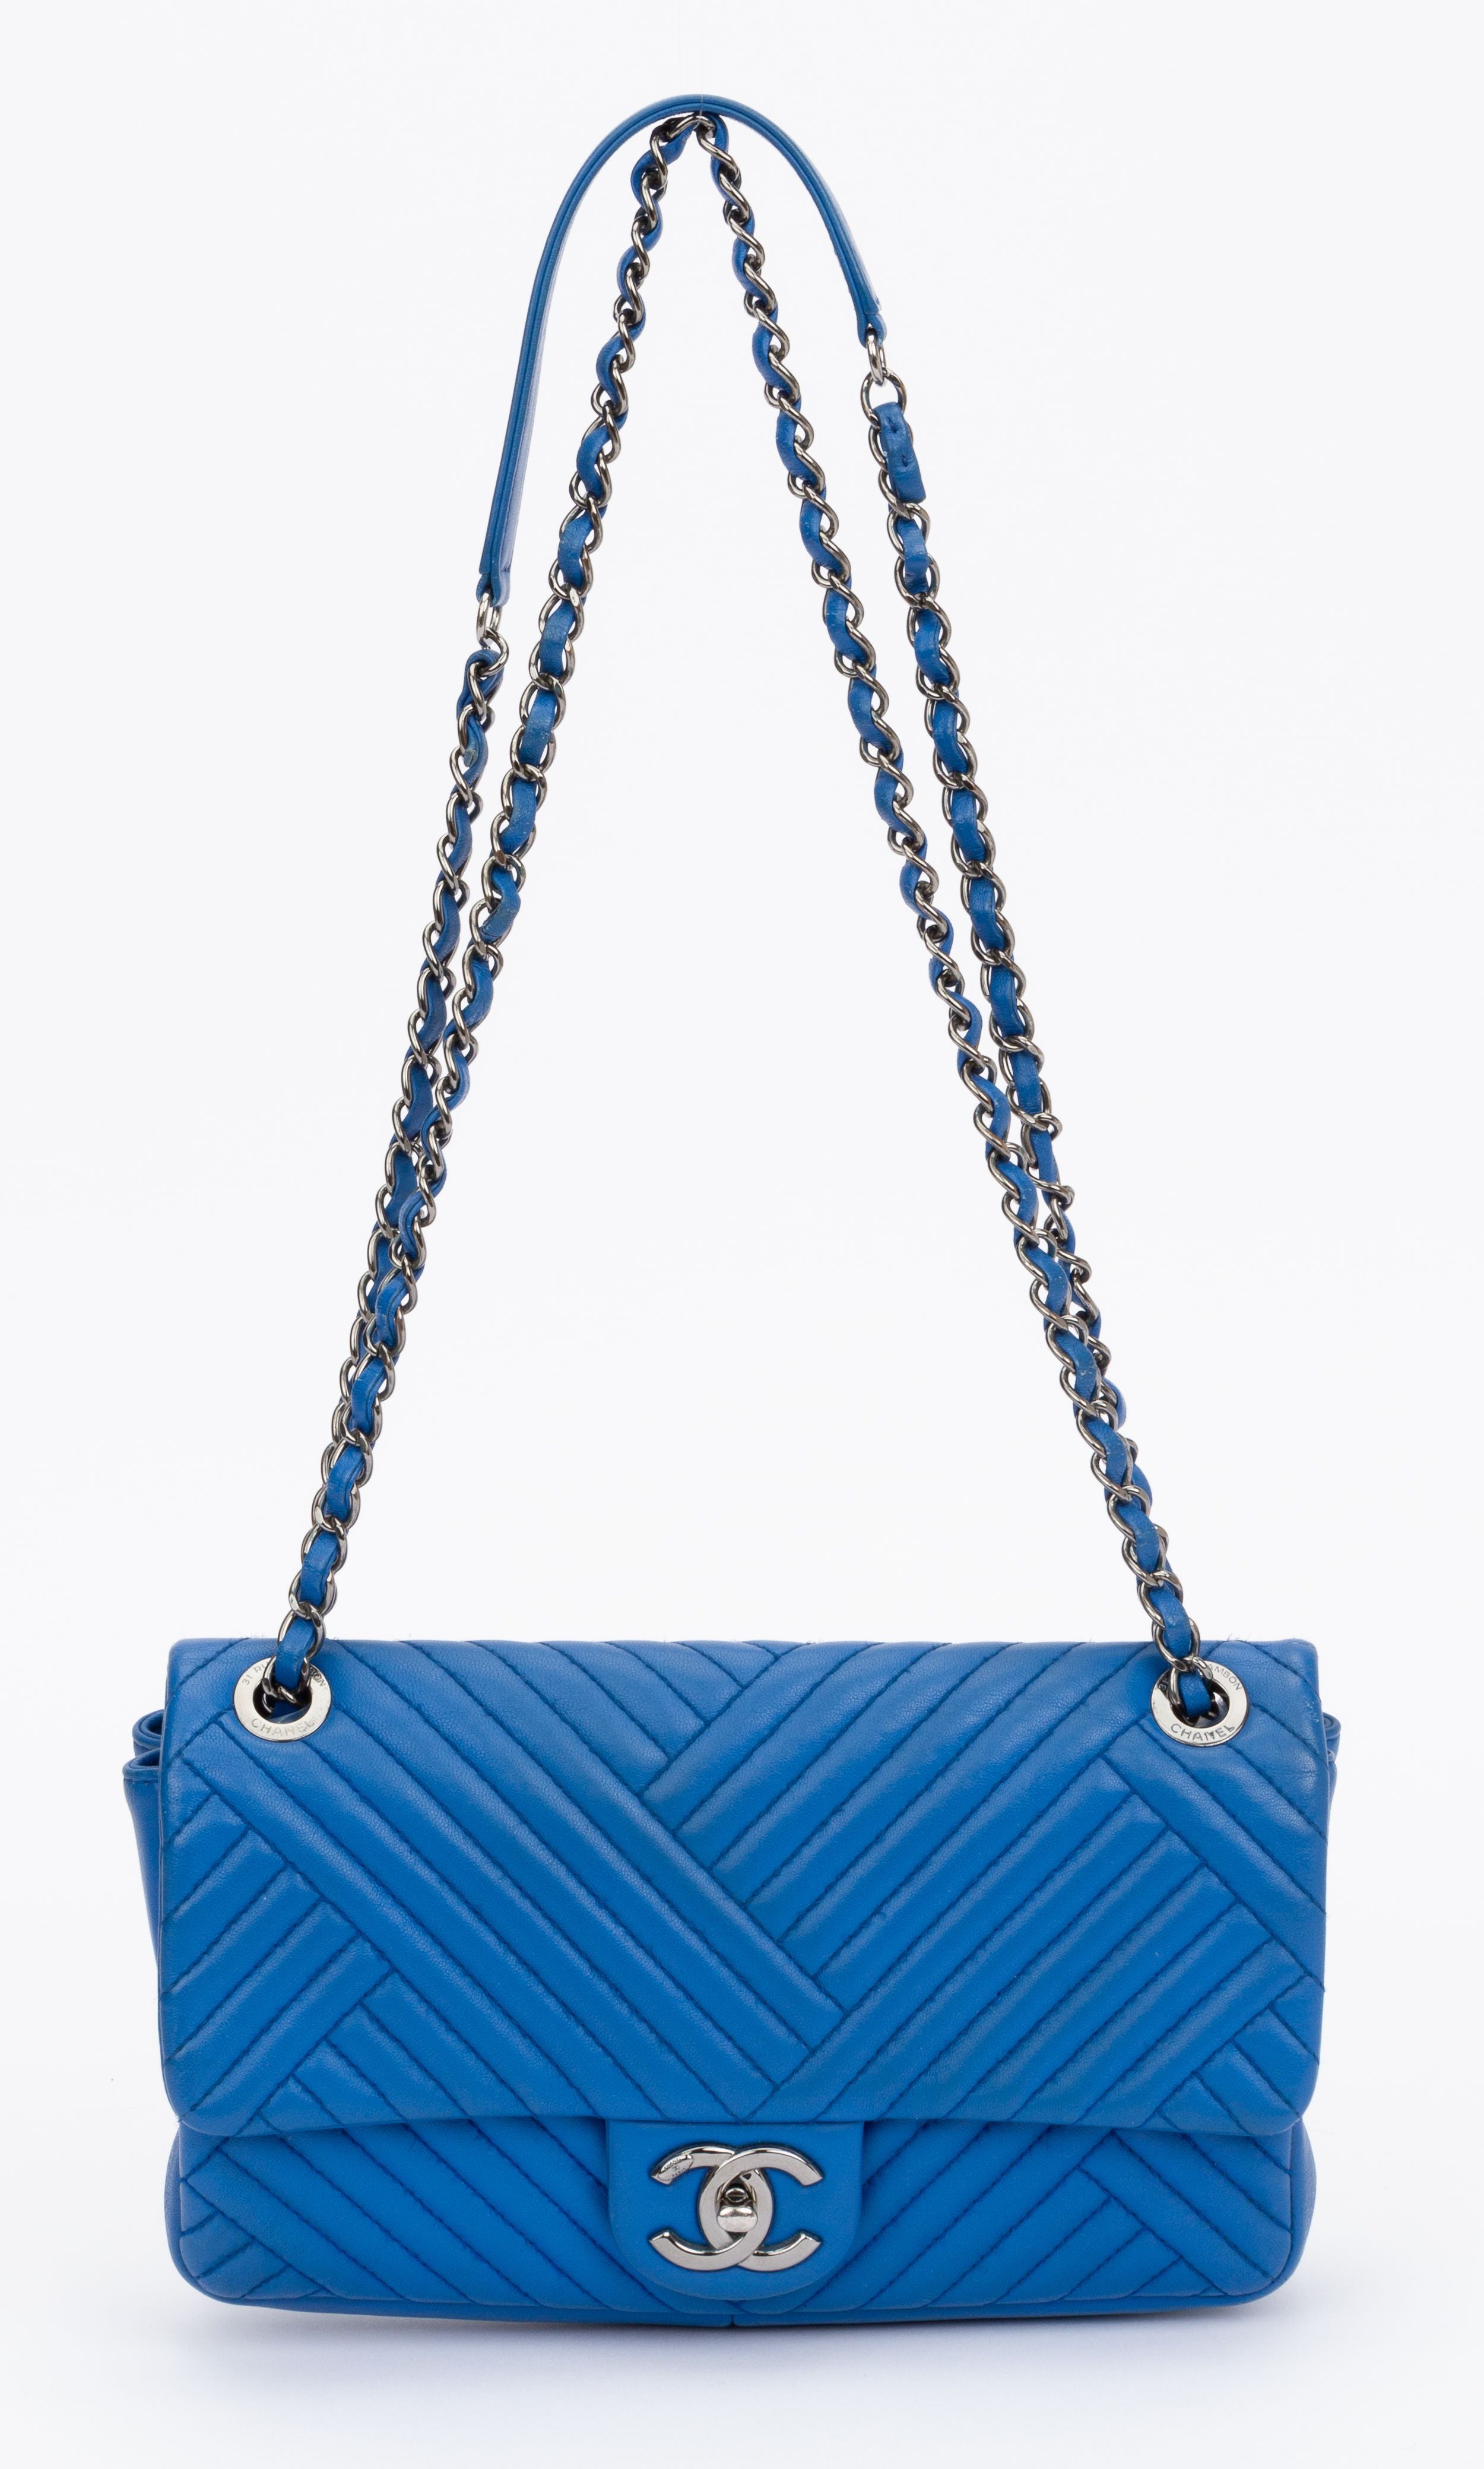 Sold at Auction: Chanel 2009 Resort Ocean Drive Single Flap